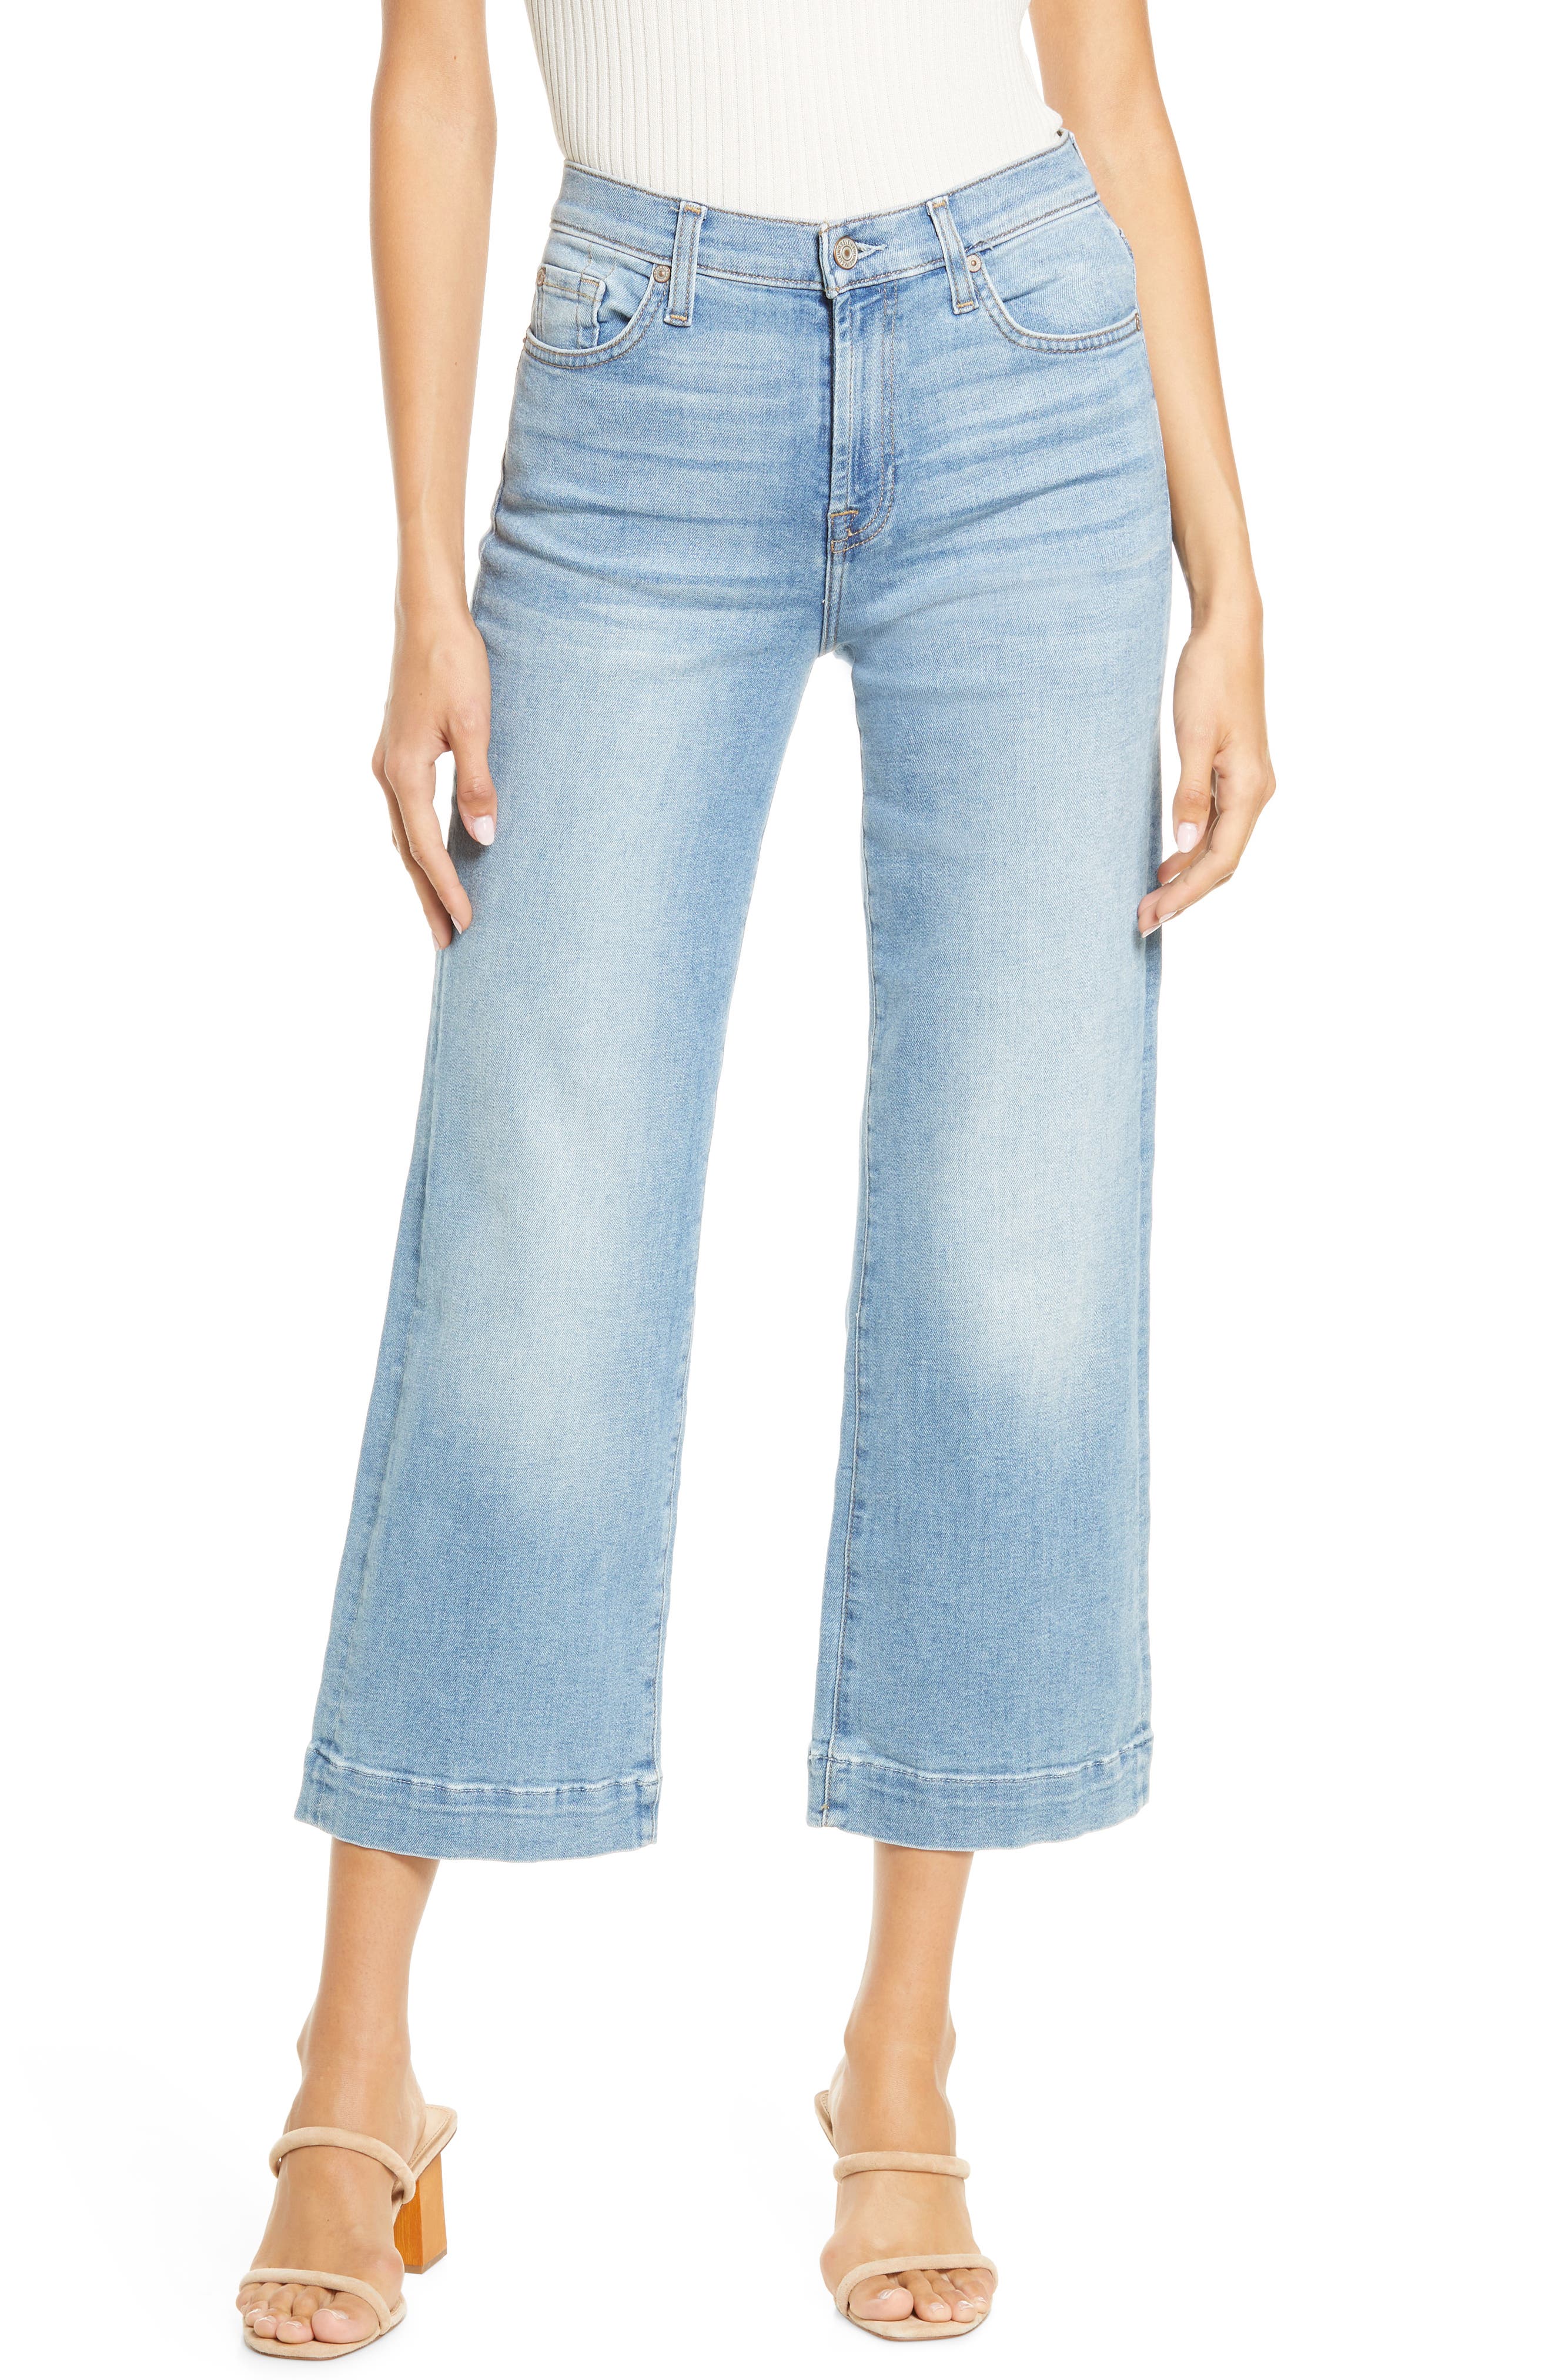 7 For All Mankind Alexa High Rise Cropped Wide Leg Jeans in Opp